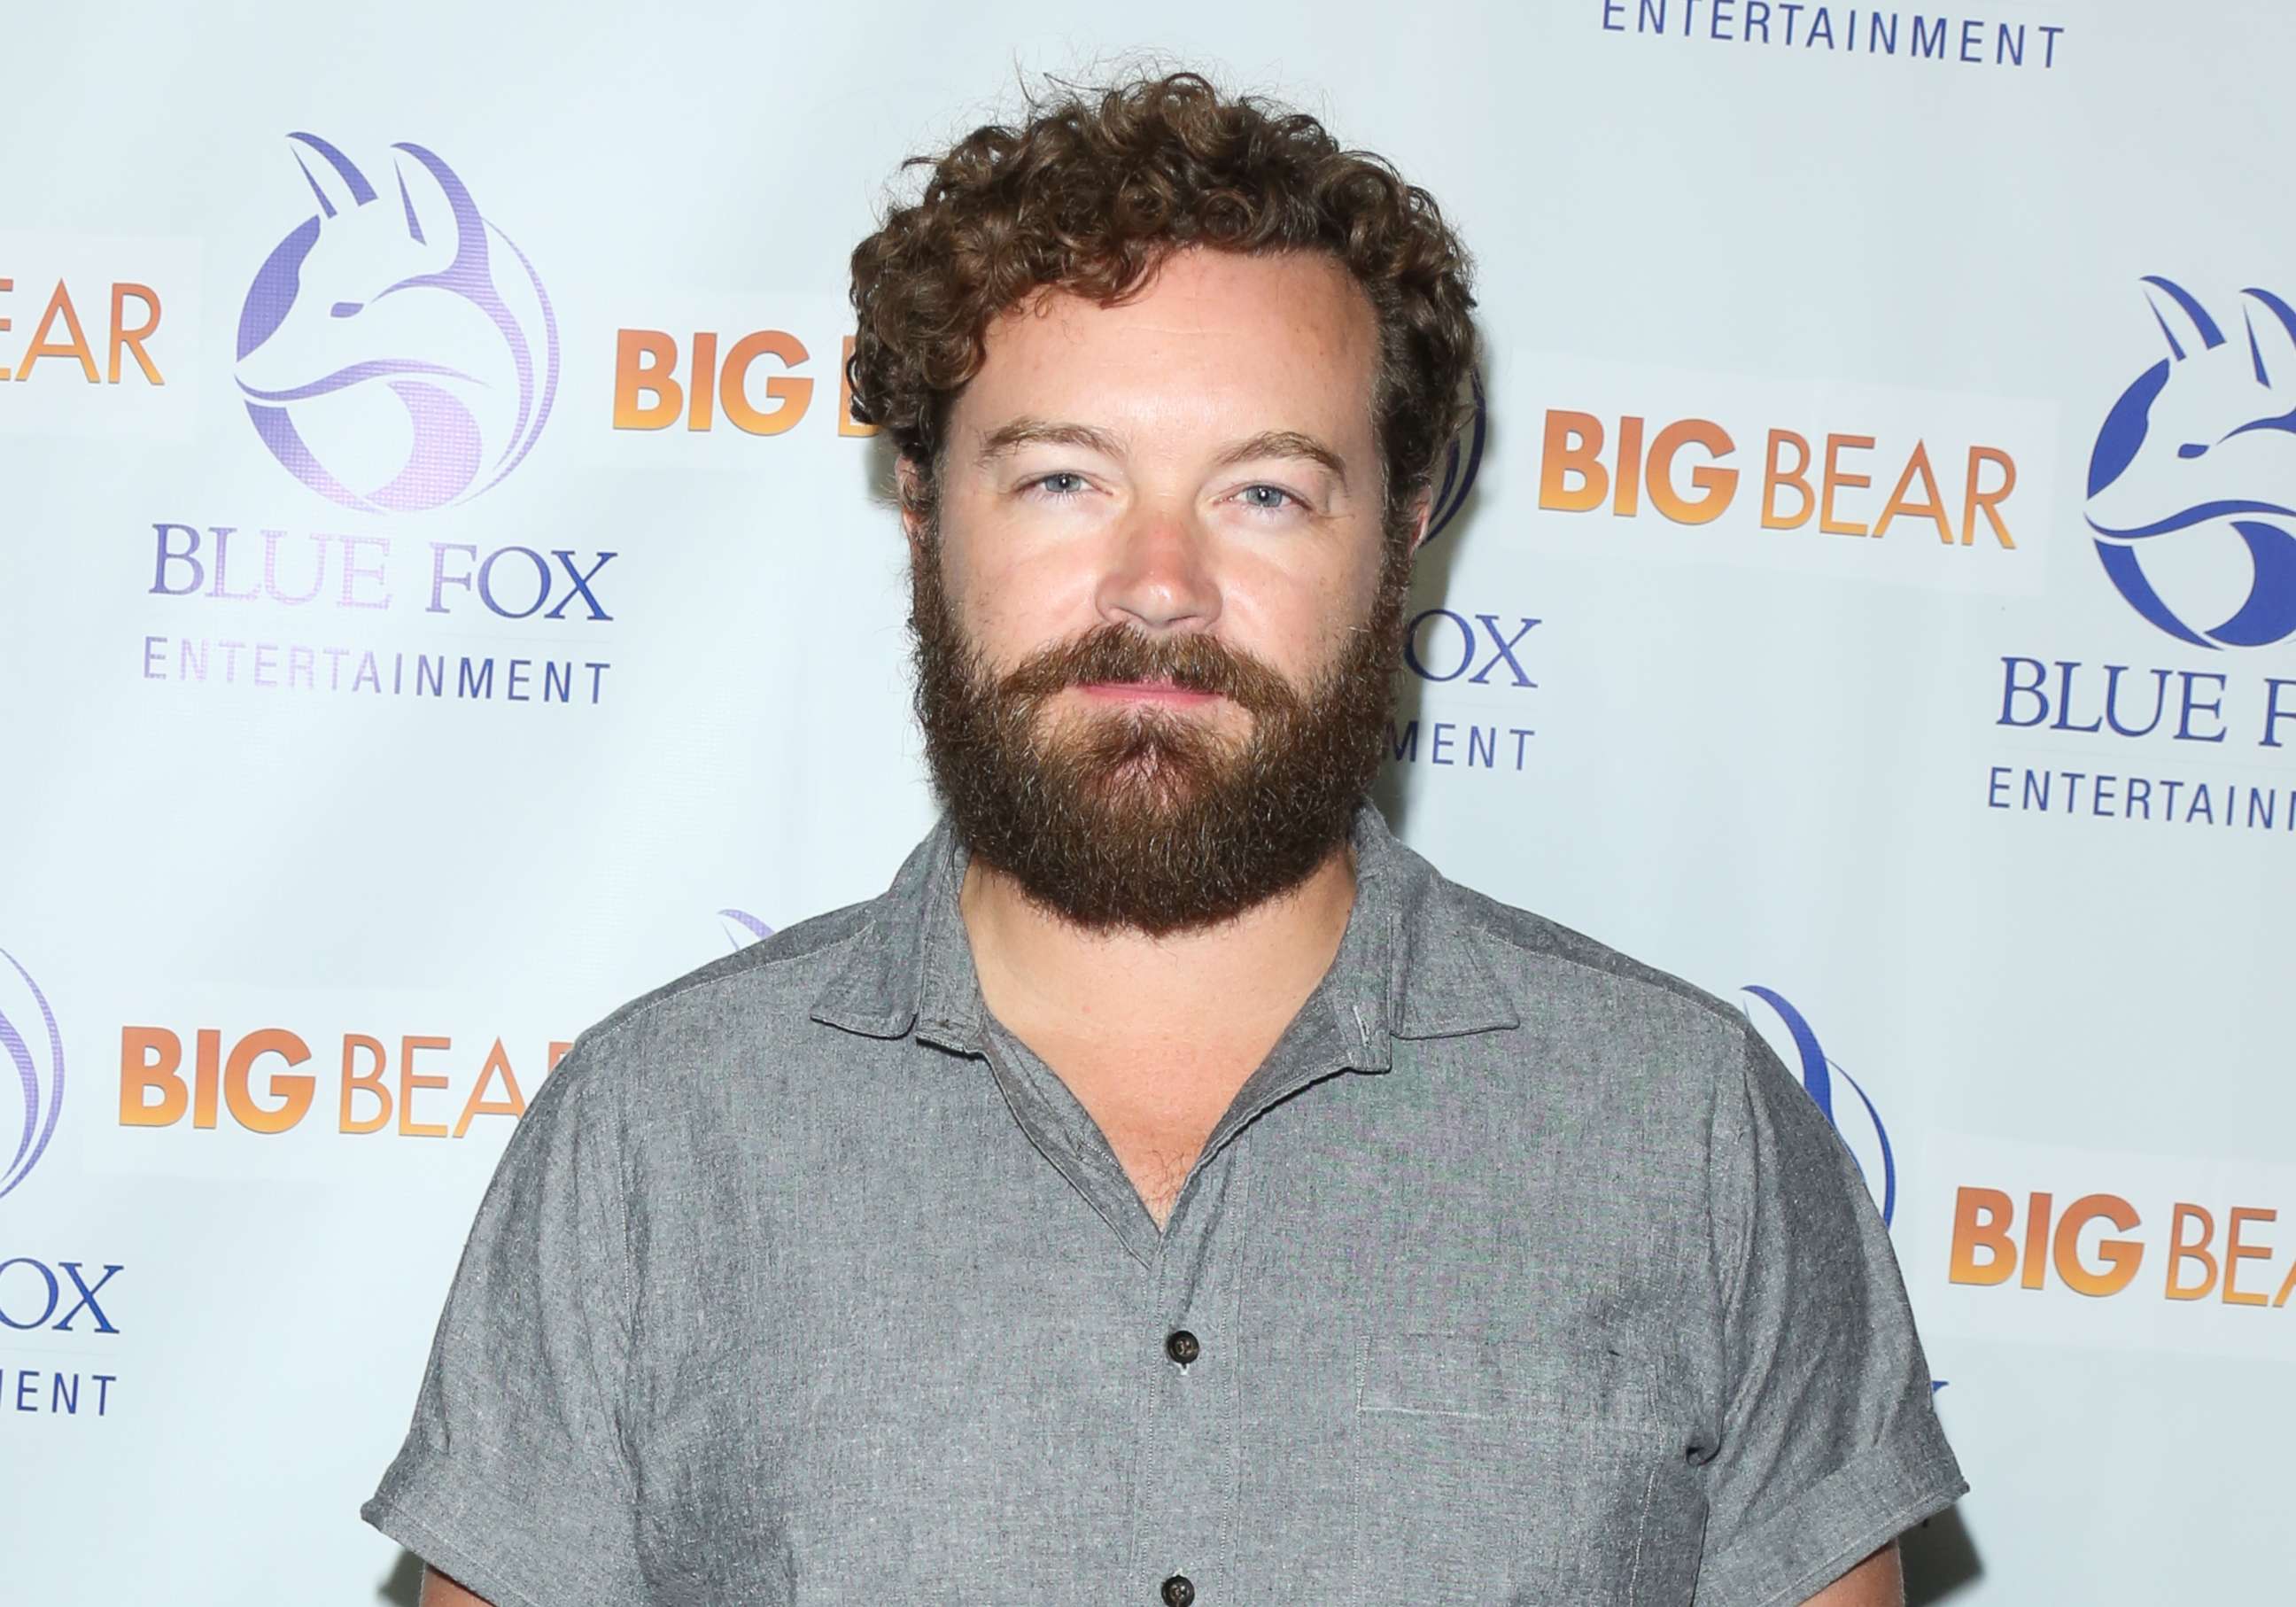 PHOTO: In this Sept. 19, 2017, file photo, actor Danny Masterson attends a movie premiere in West Hollywood, Calif.